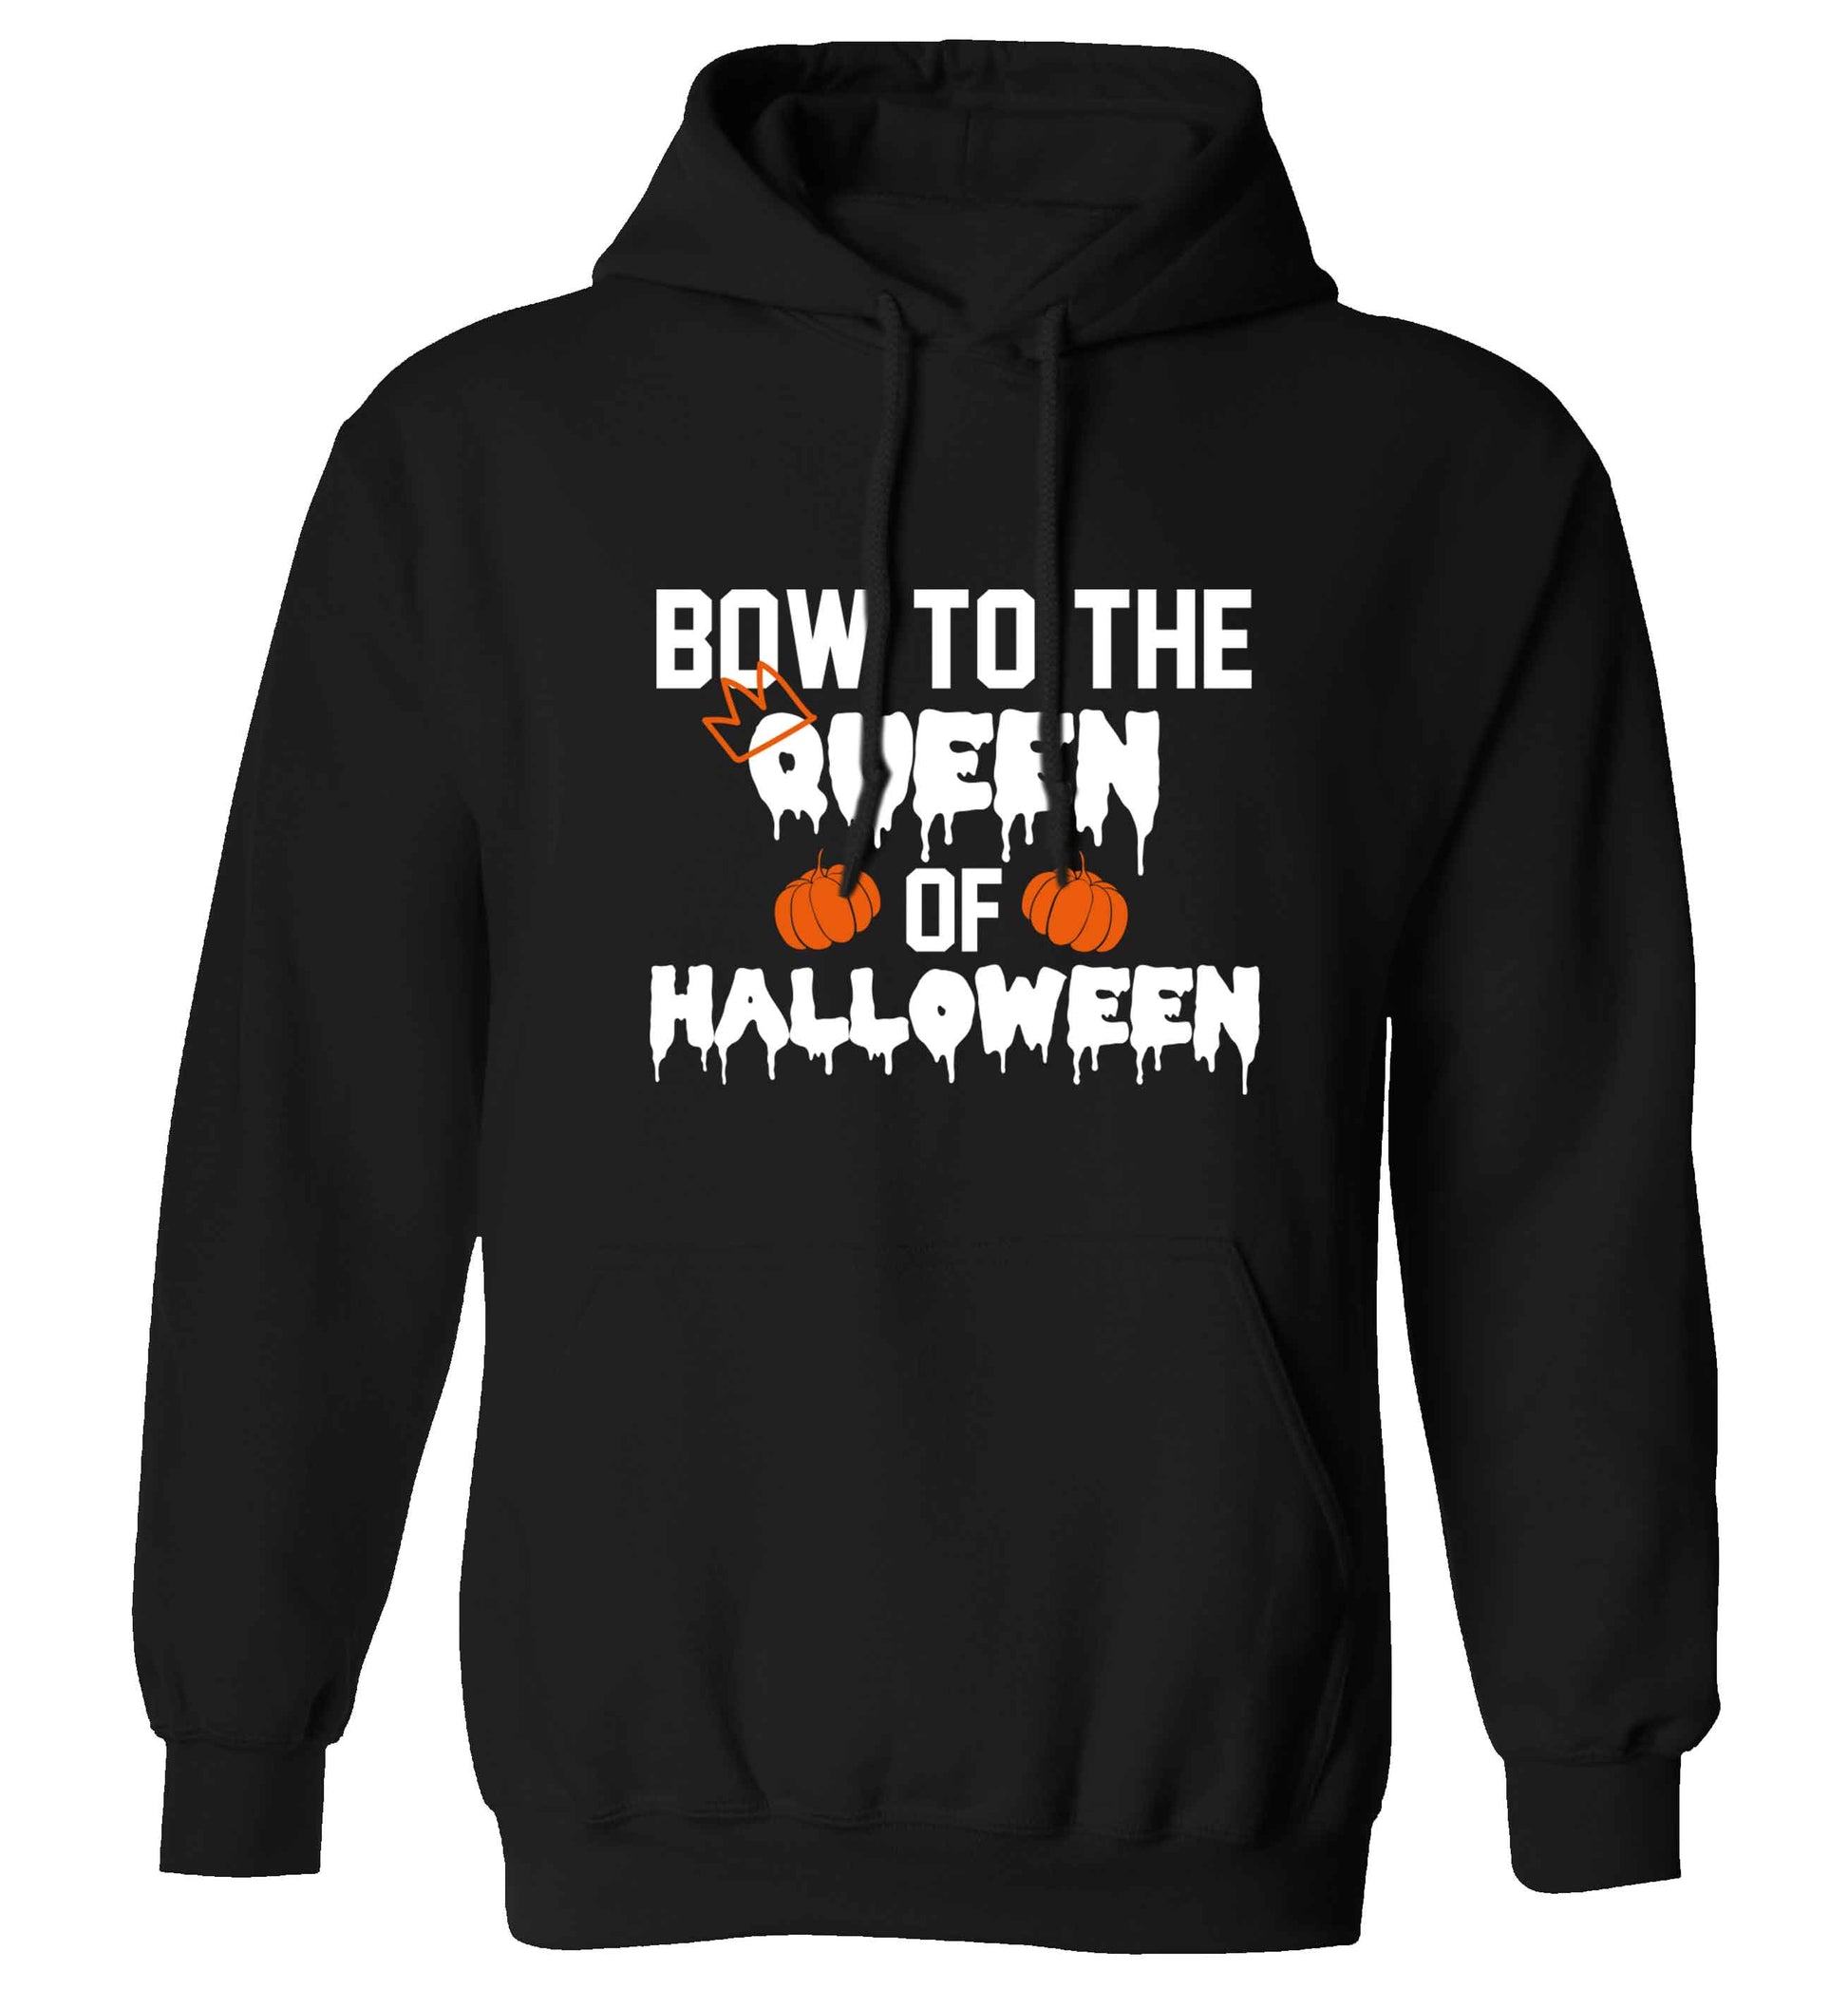 Bow to the Queen of halloween adults unisex black hoodie 2XL